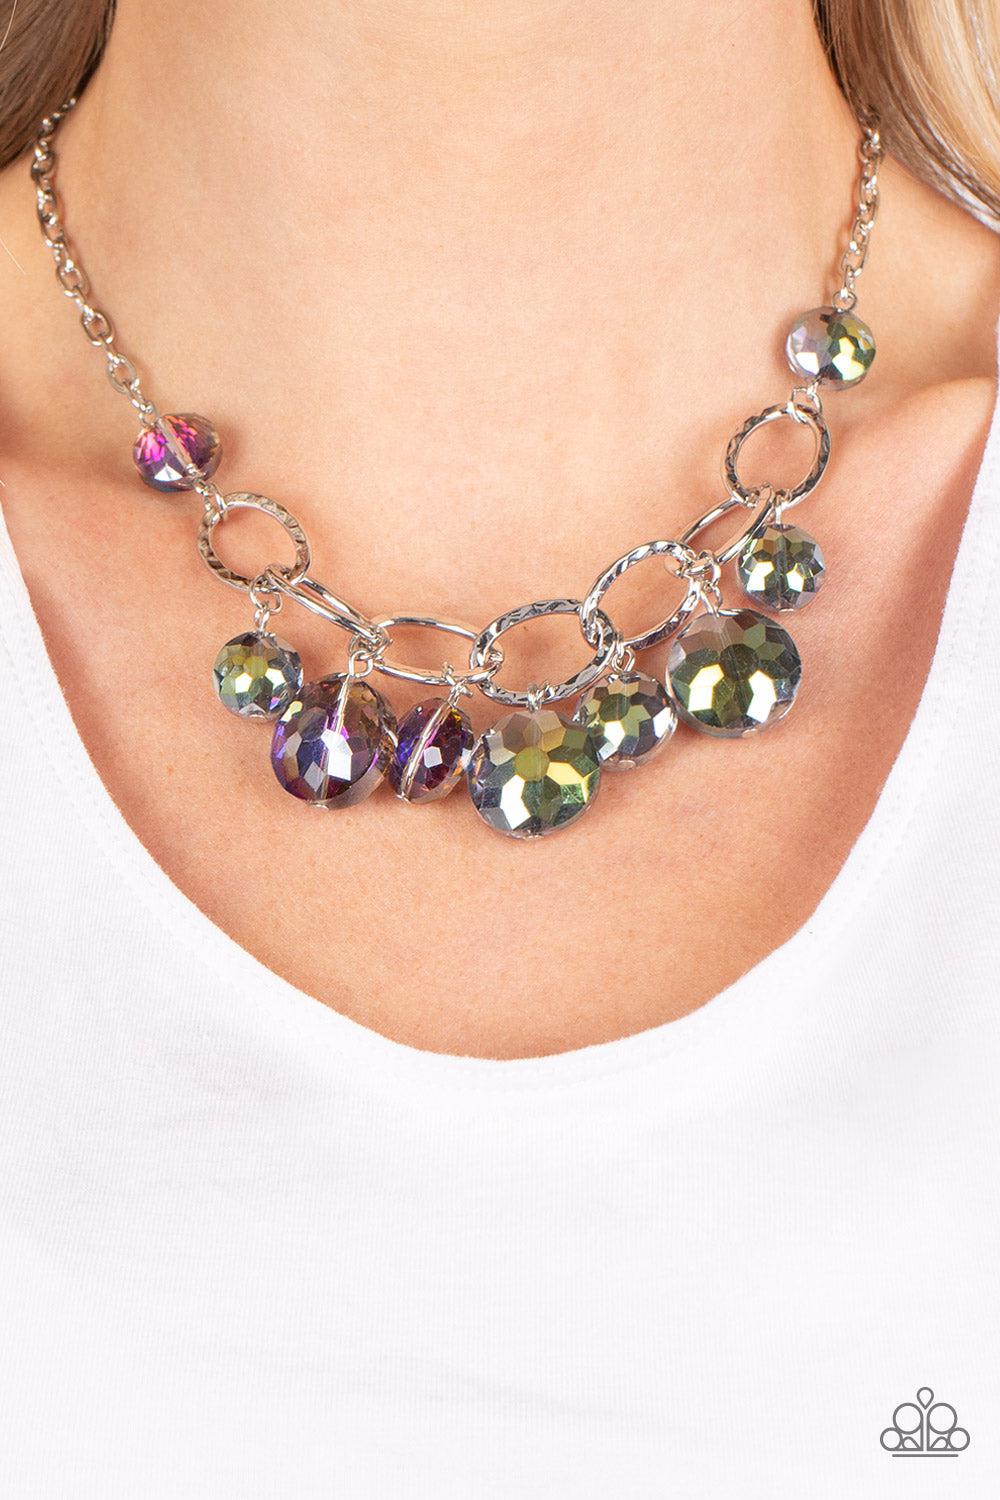 Rhinestone River Multi Purple Oil Spill Necklace - Paparazzi Accessories-on model - CarasShop.com - $5 Jewelry by Cara Jewels